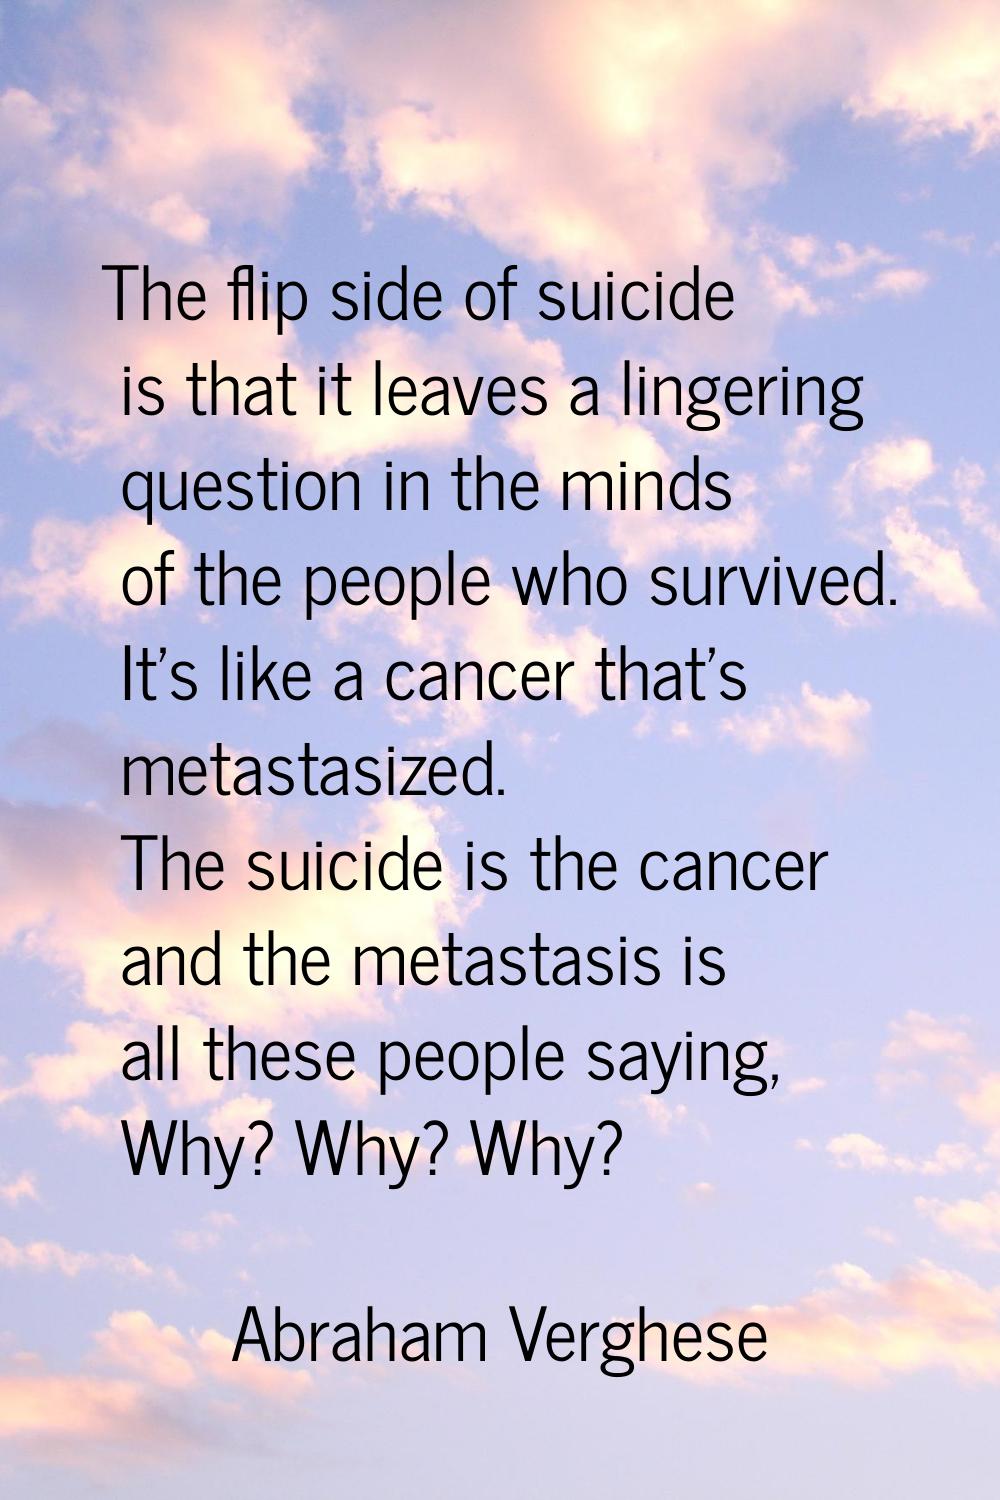 The flip side of suicide is that it leaves a lingering question in the minds of the people who surv